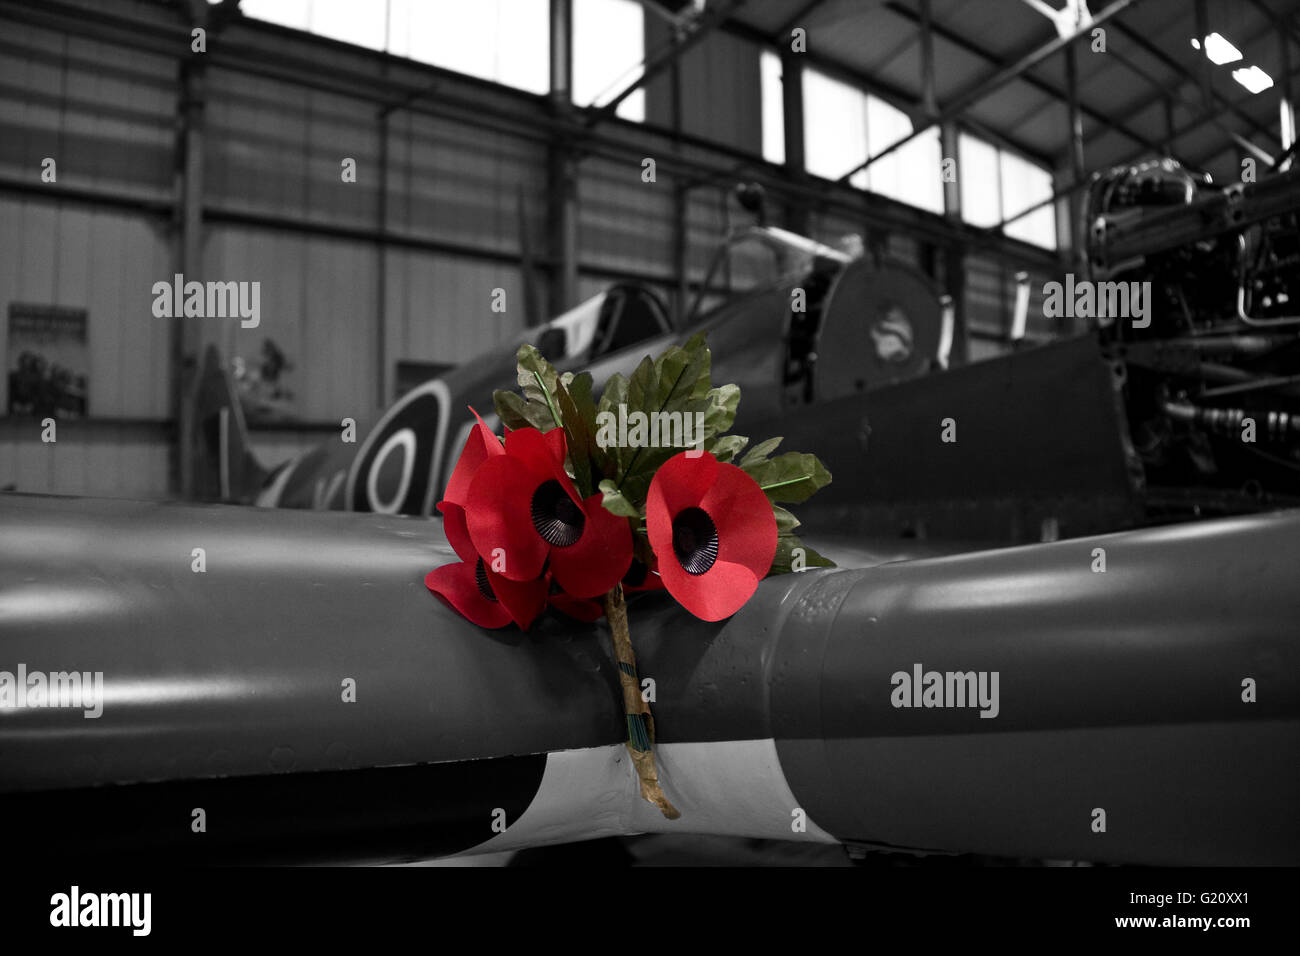 For the Fallen, Poppies on a Spitfire. Stock Photo